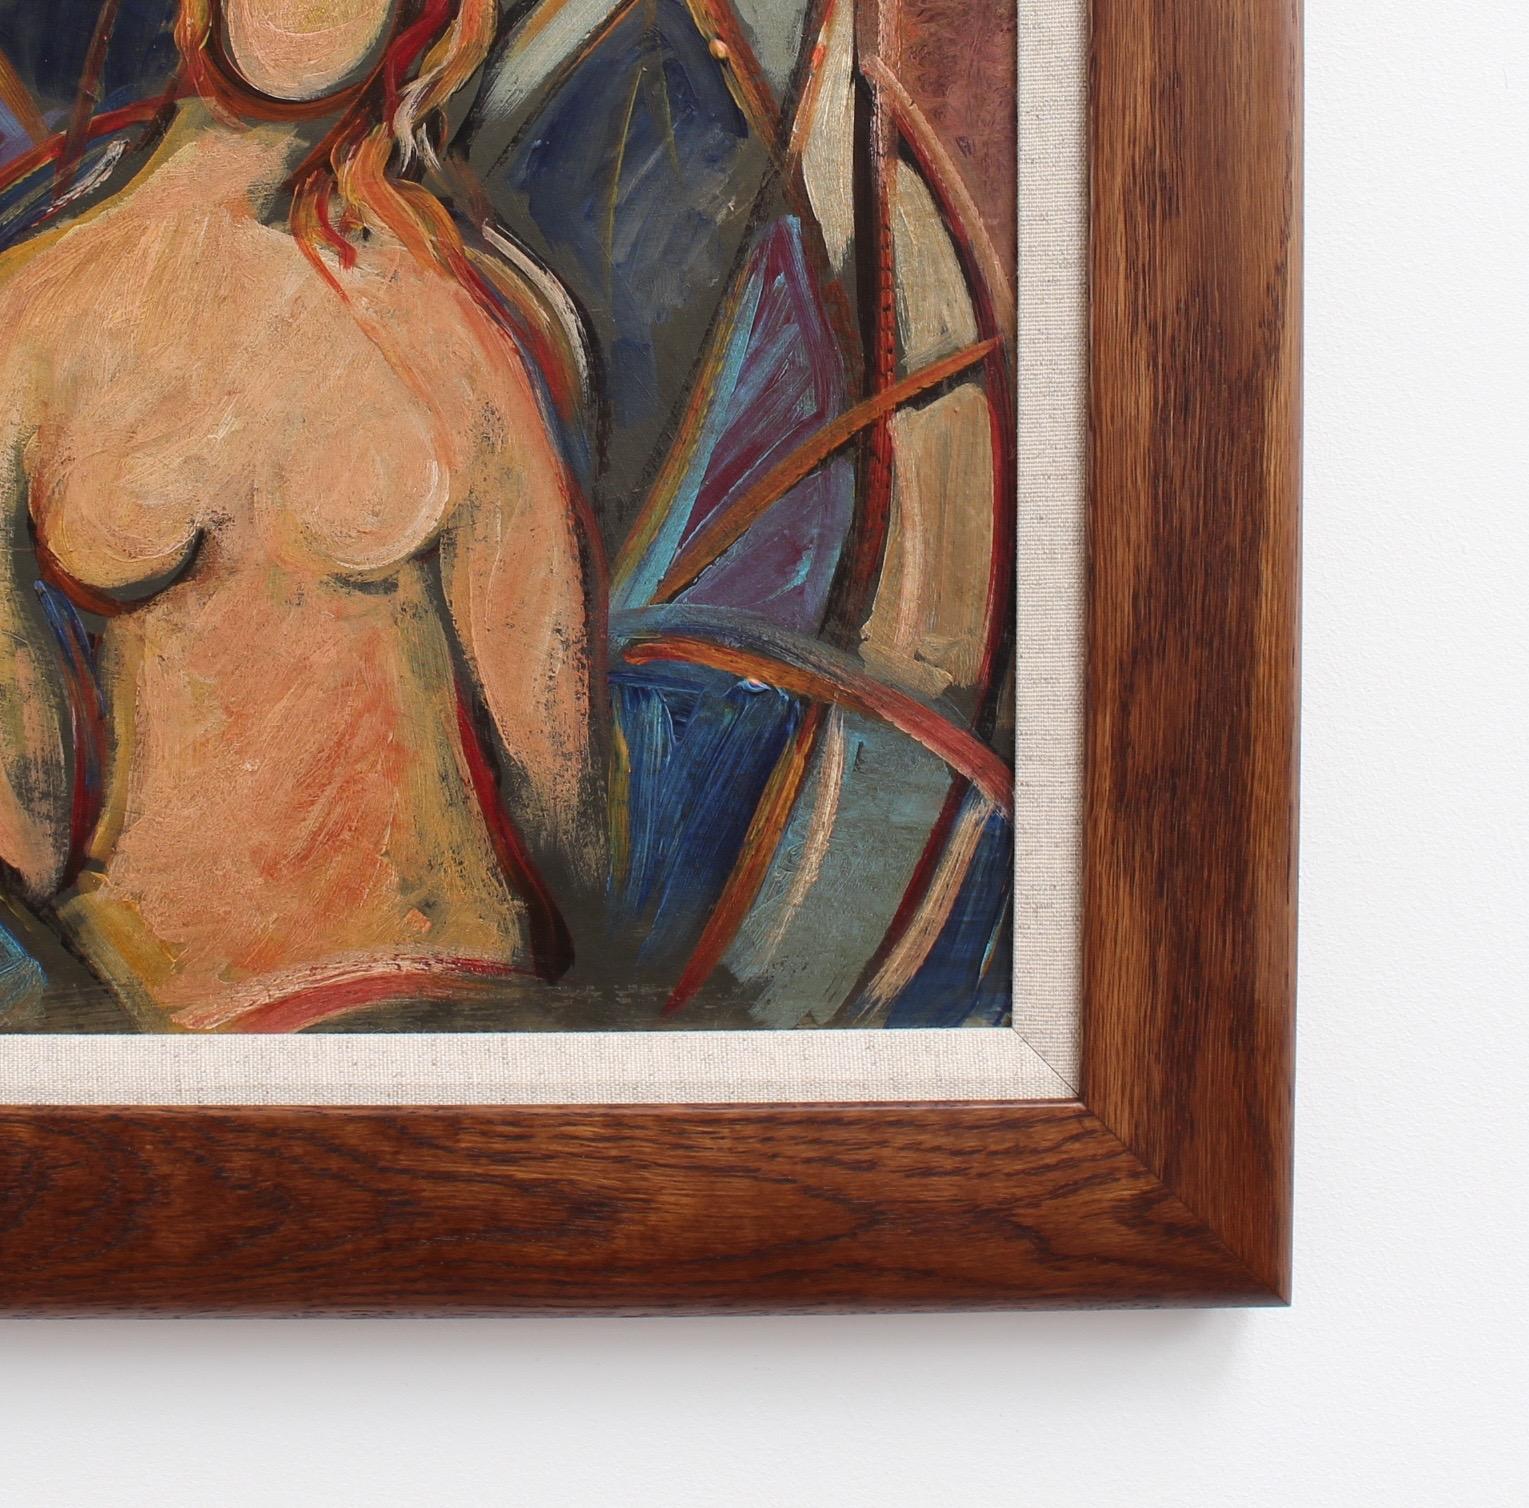 'Nudes in Repose' by STM, Mid-Century Modern Cubist Portrait Painting, Berlin 7